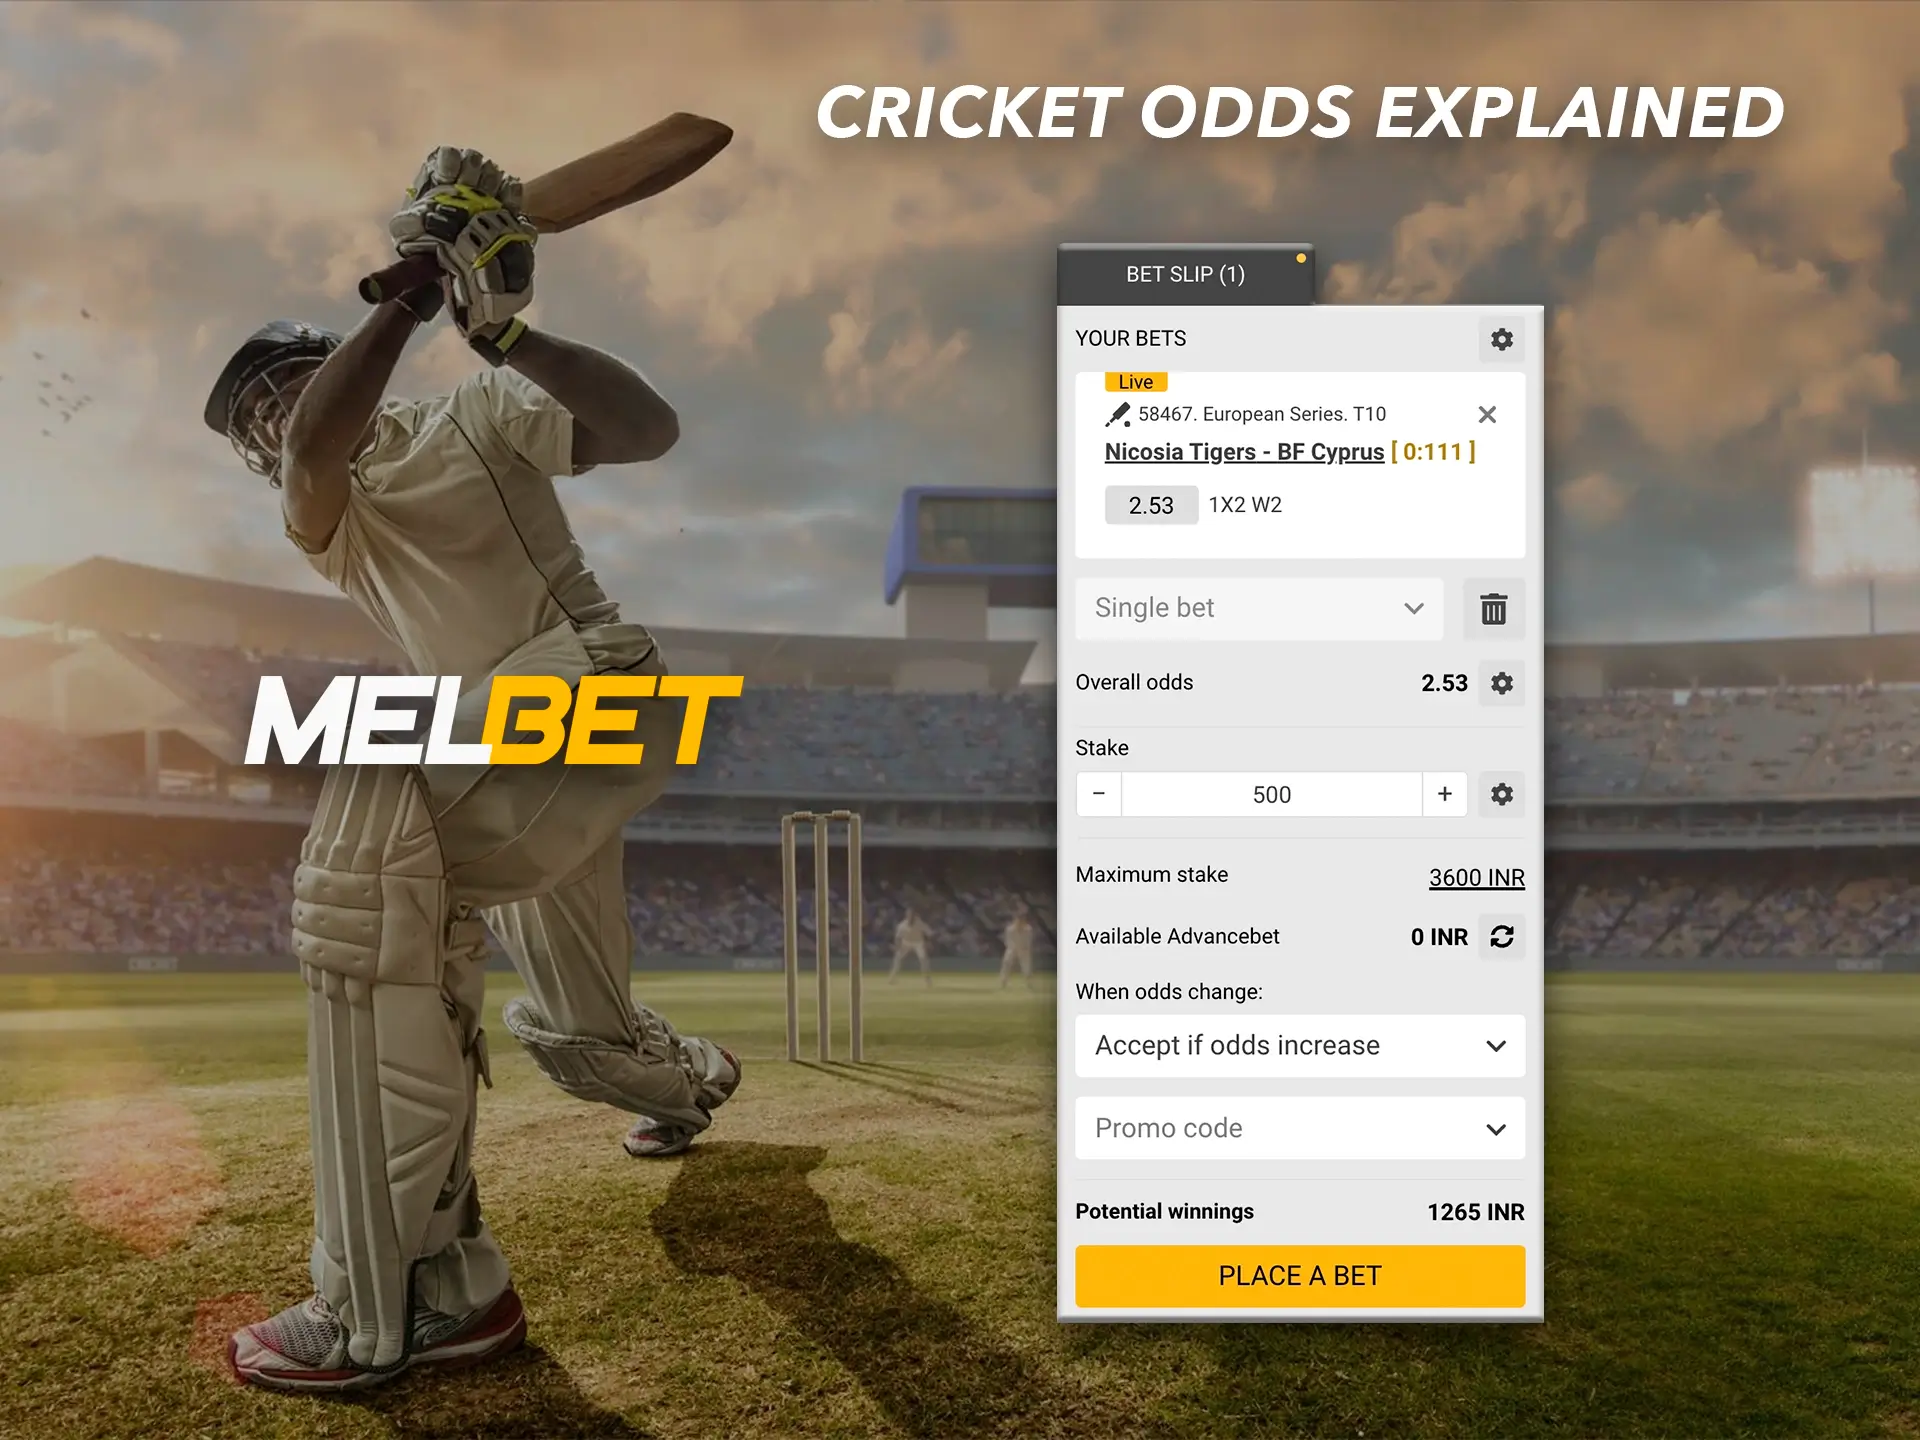 Melbet offers the most favourable conditions for cricket betting.